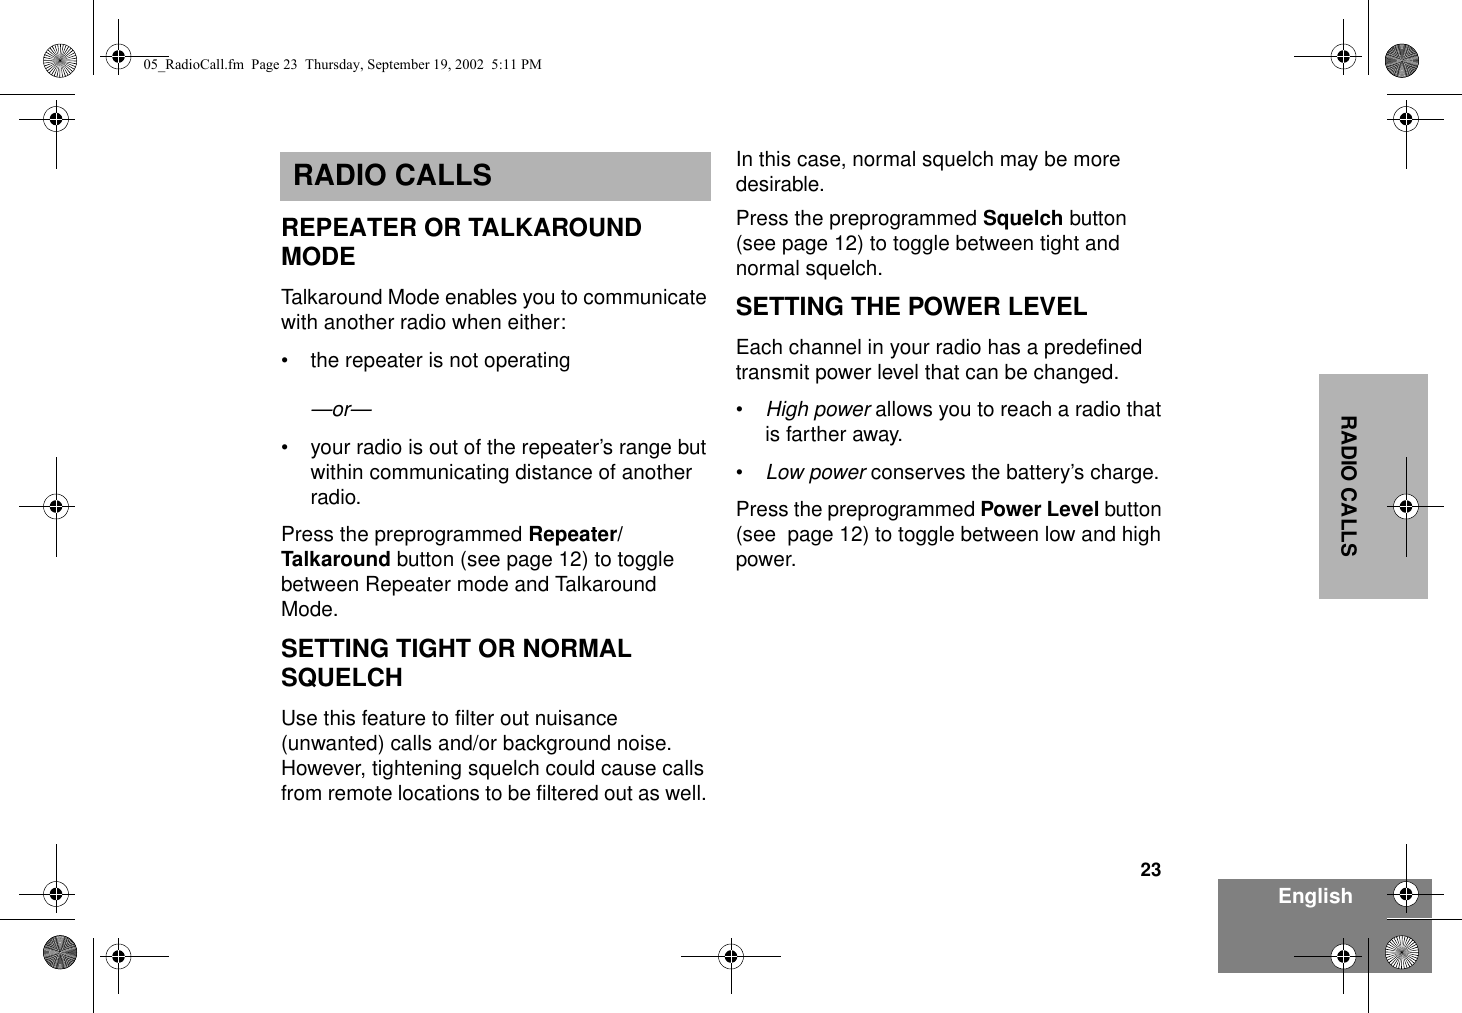 23EnglishRADIO CALLSRADIO CALLSREPEATER OR TALKAROUND MODETalkaround Mode enables you to communicate with another radio when either:• the repeater is not operating—or—• your radio is out of the repeater’s range but within communicating distance of another radio.Press the preprogrammed Repeater/Talkaround button (see page 12) to toggle between Repeater mode and Talkaround Mode.SETTING TIGHT OR NORMAL SQUELCHUse this feature to filter out nuisance (unwanted) calls and/or background noise. However, tightening squelch could cause calls from remote locations to be filtered out as well. In this case, normal squelch may be more desirable.Press the preprogrammed Squelch button (see page 12) to toggle between tight and normal squelch.SETTING THE POWER LEVELEach channel in your radio has a predefined transmit power level that can be changed.•High power allows you to reach a radio that is farther away.•Low power conserves the battery’s charge.Press the preprogrammed Power Level button (see  page 12) to toggle between low and high power.05_RadioCall.fm  Page 23  Thursday, September 19, 2002  5:11 PM